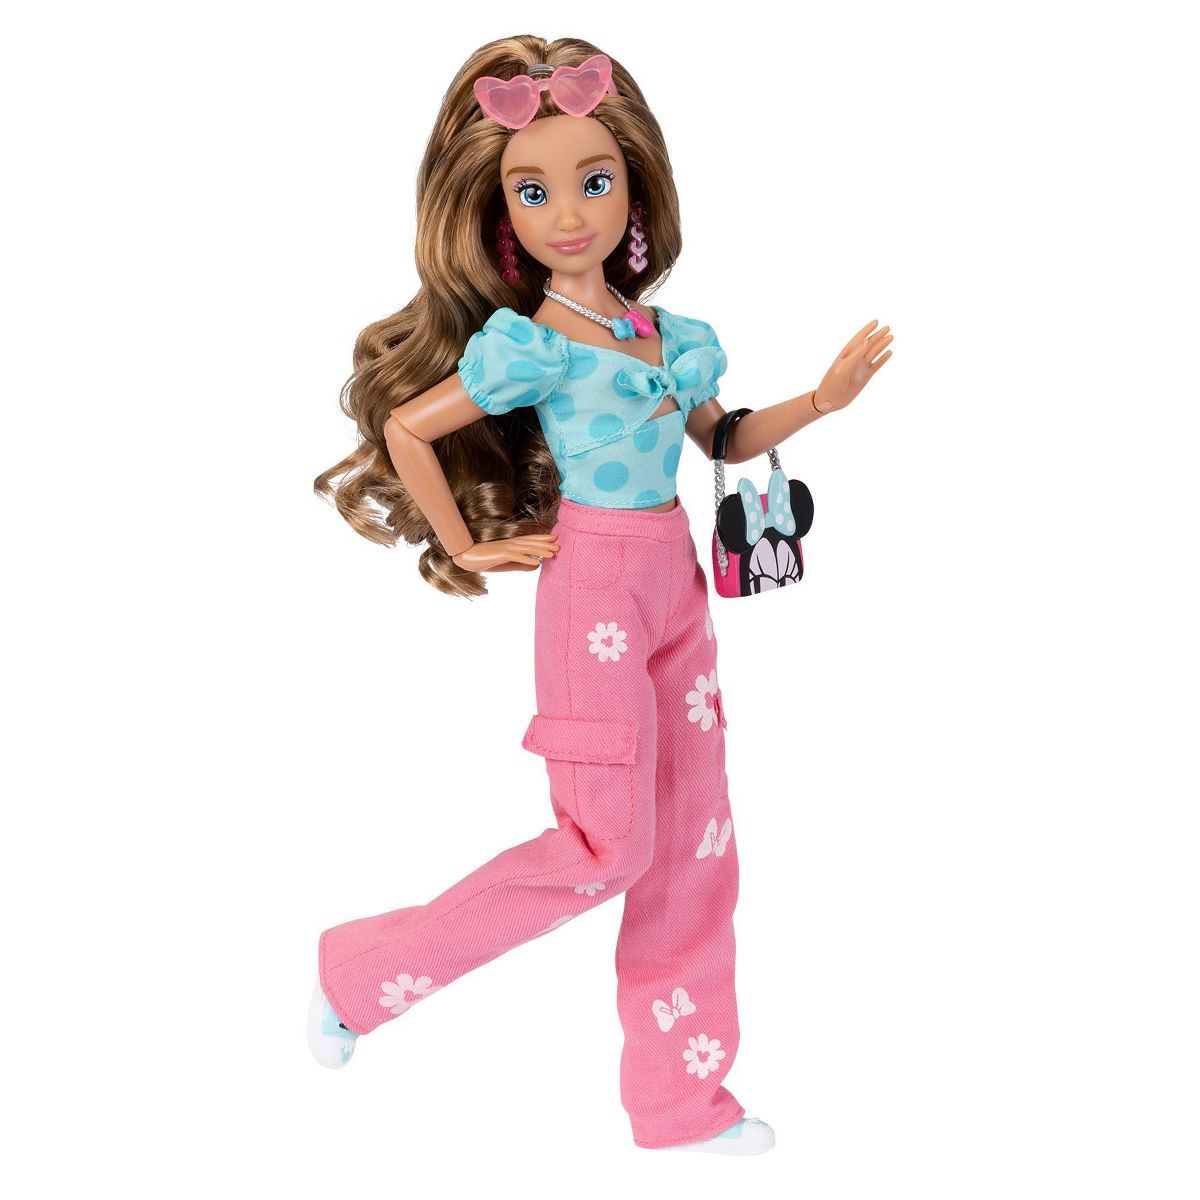 Disney ily 4EVER Inspired by Minnie Mouse Fashion Doll | Target